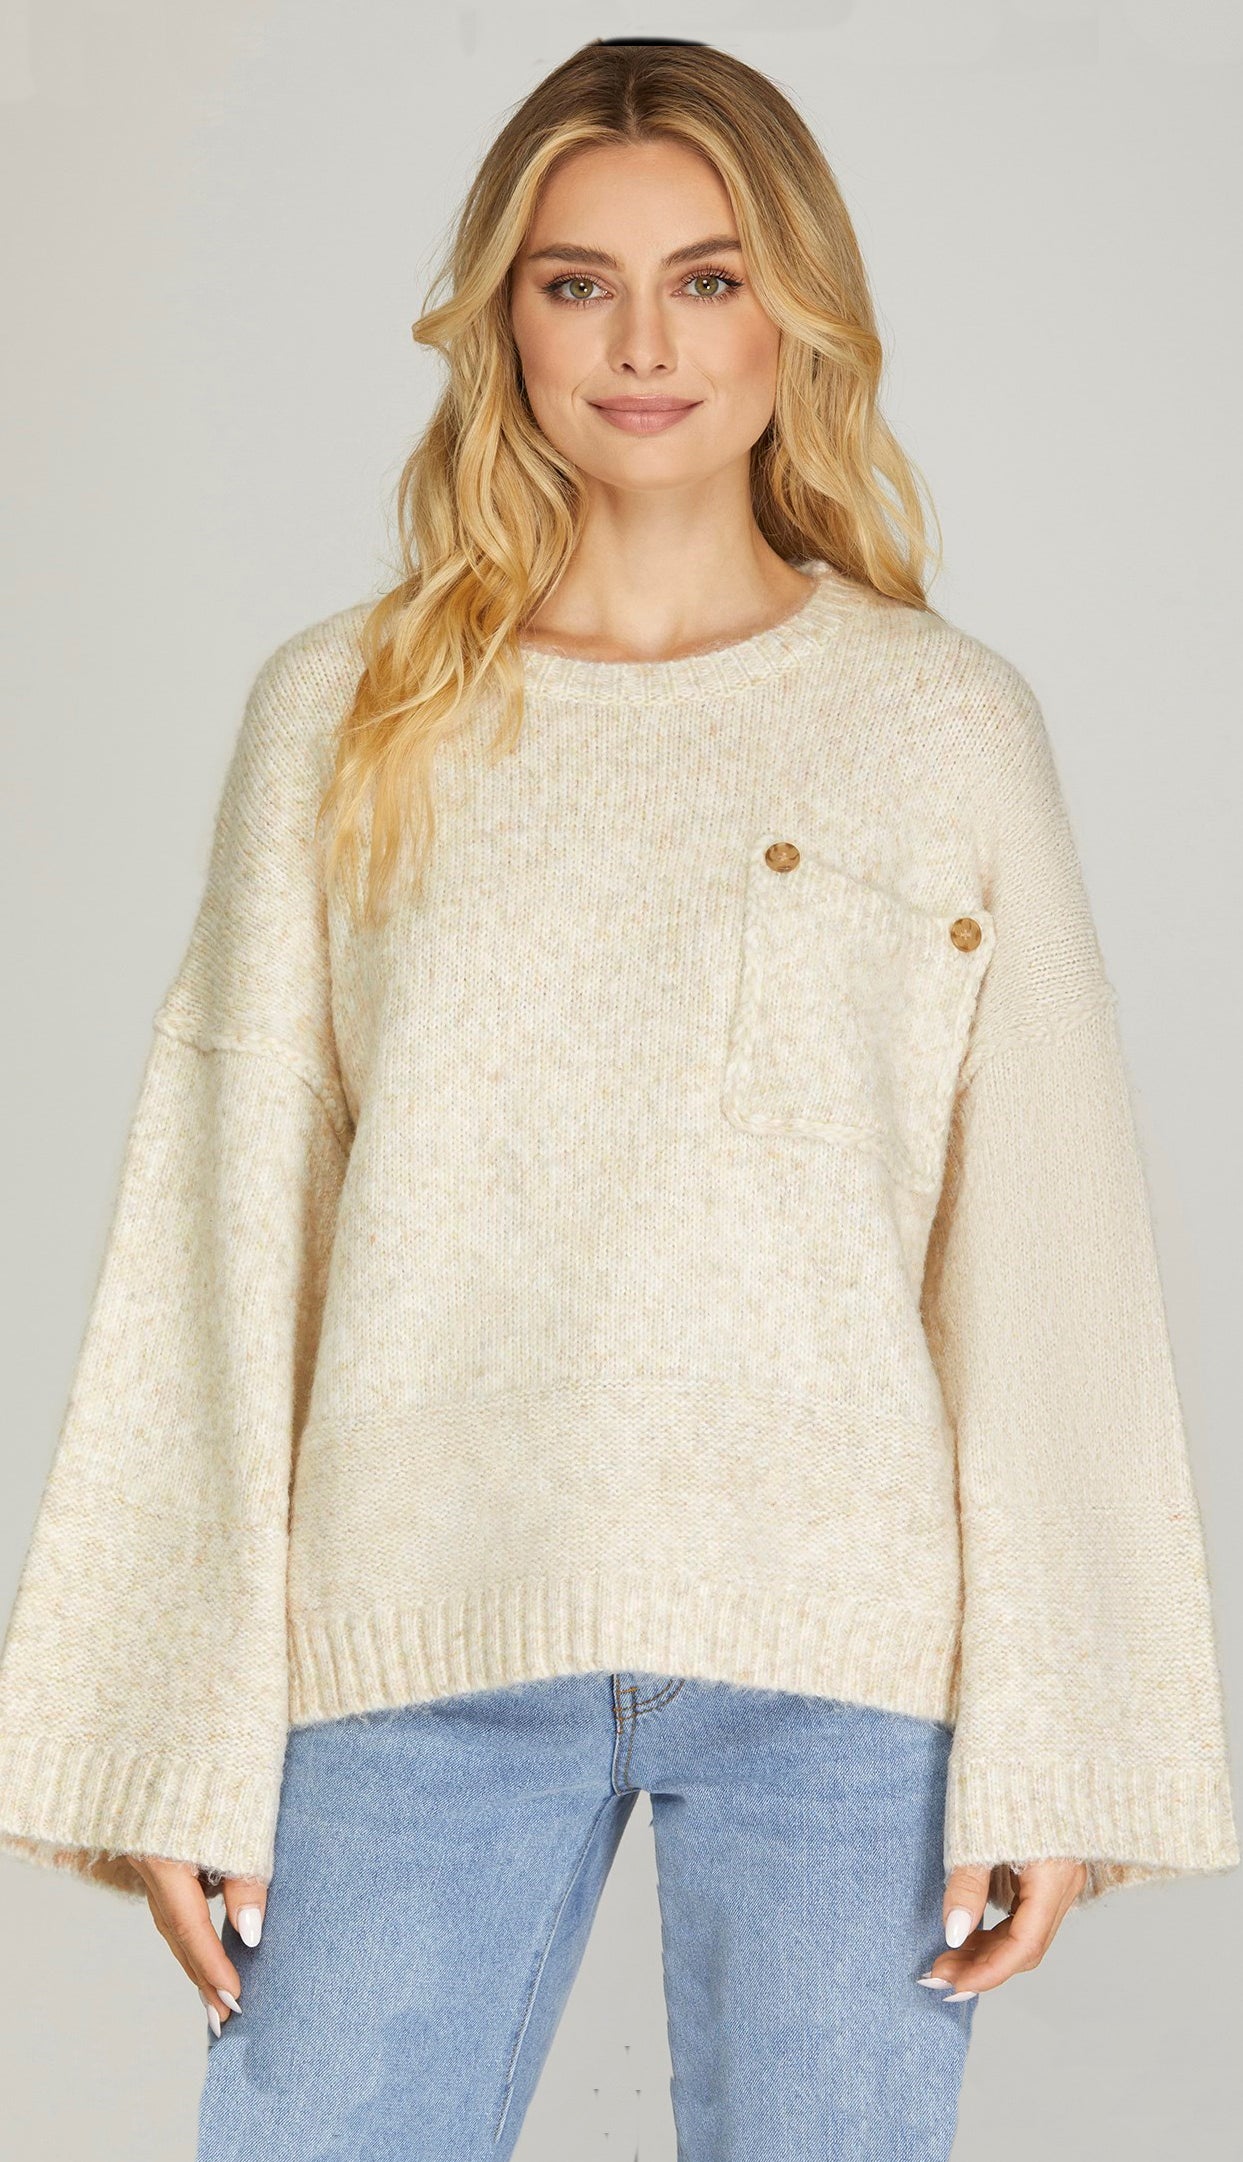 Nicely Neutral Pocket Sweater- Oatmeal